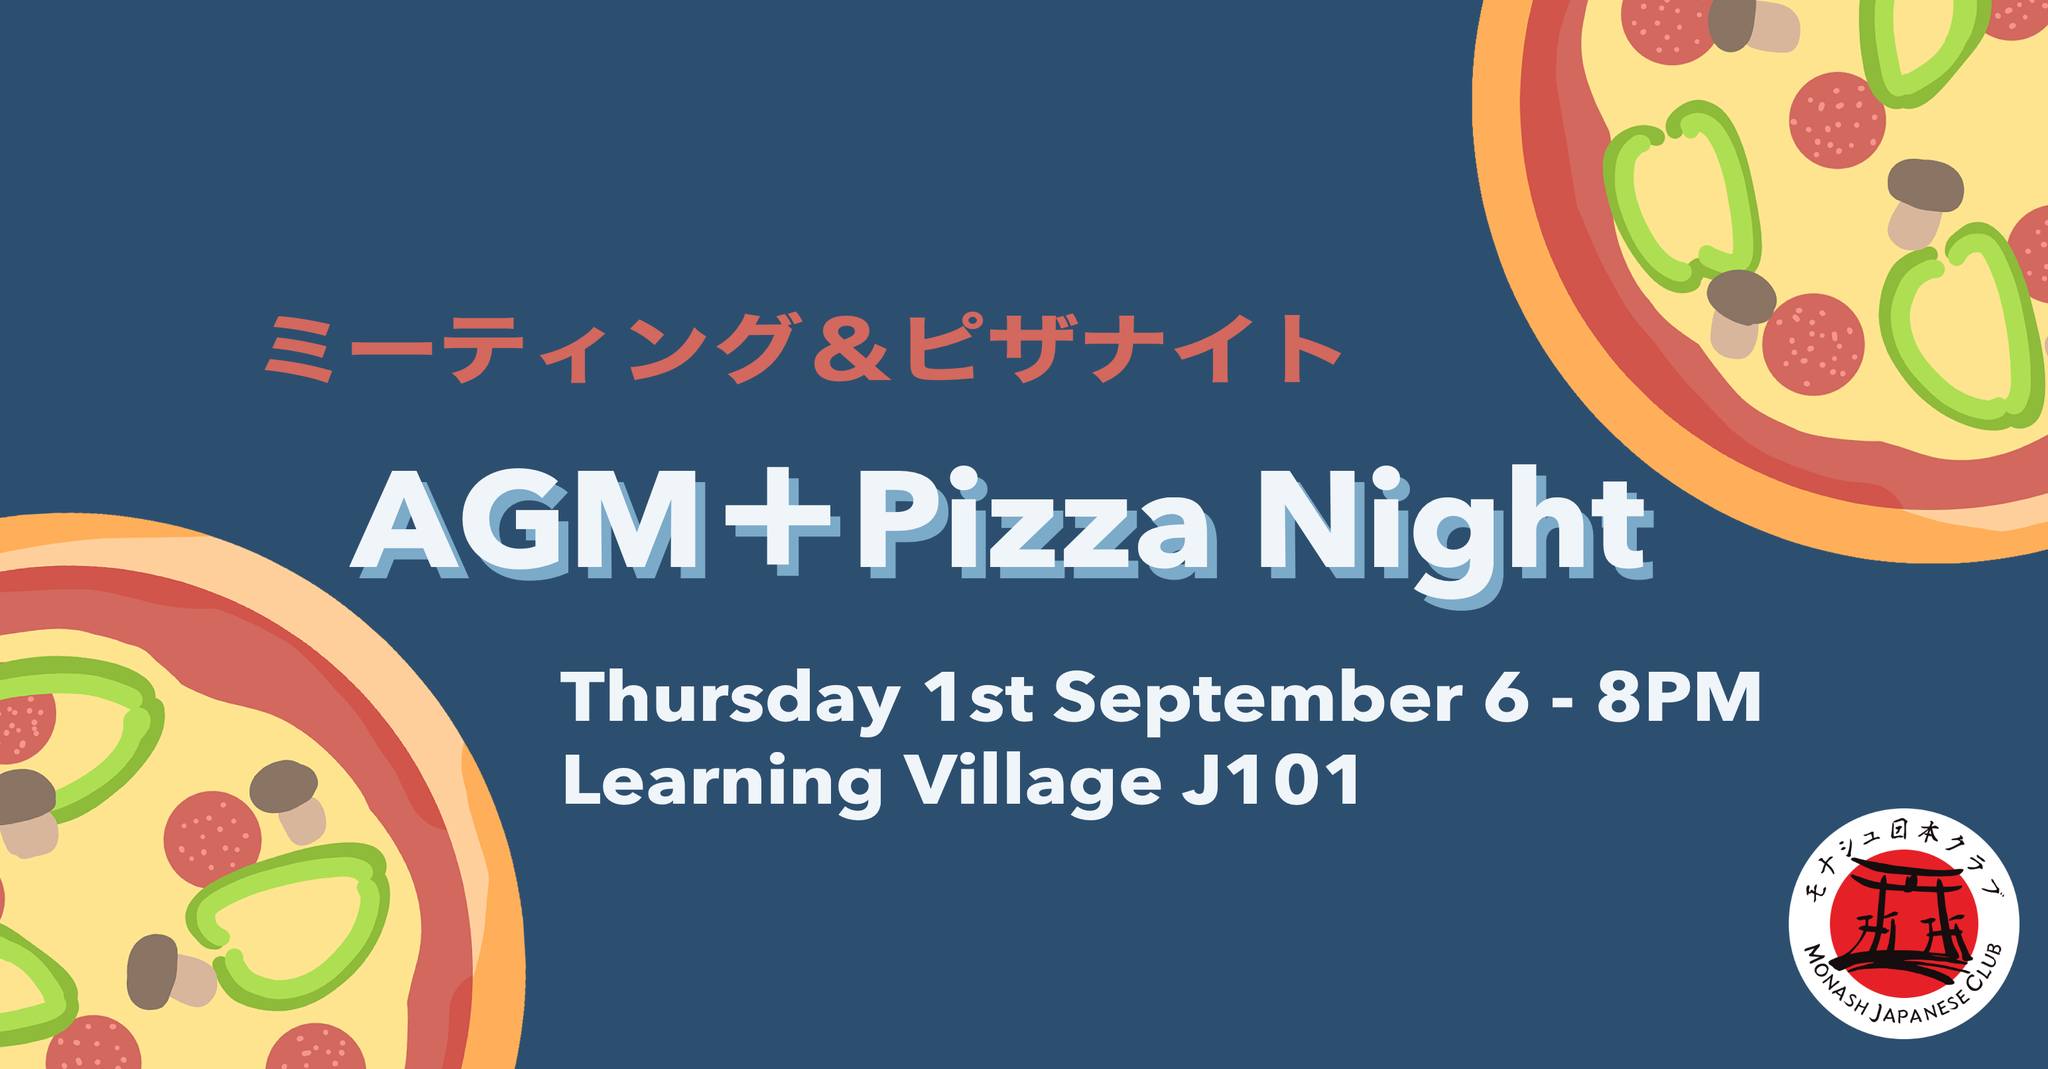 AGM + Pizza Night banner